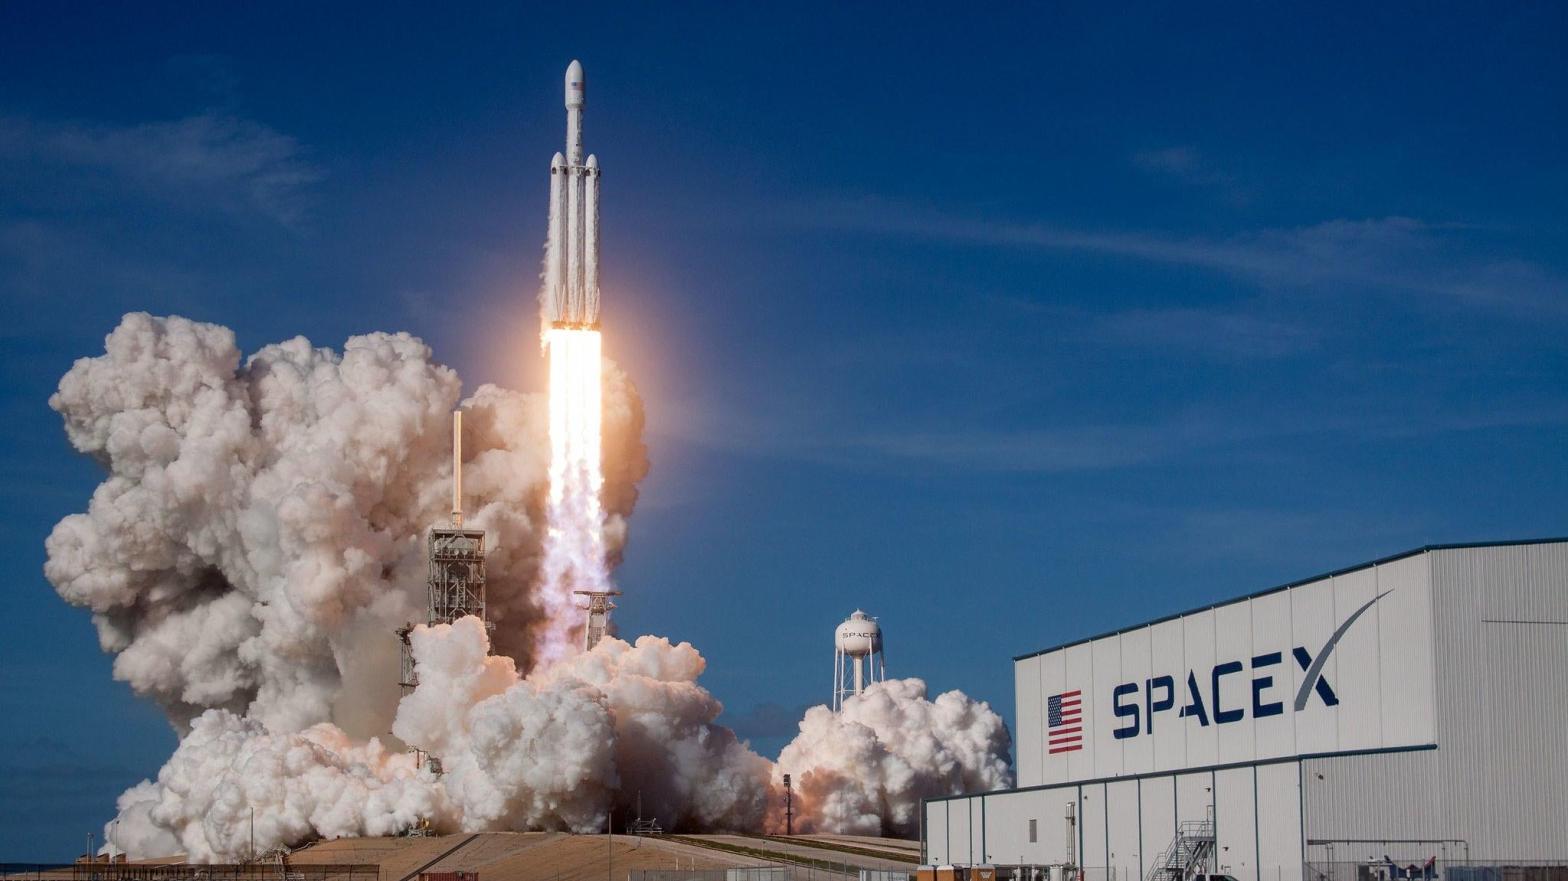 A Falcon Heavy blasting off in February 2018. (Photo: SpaceX)